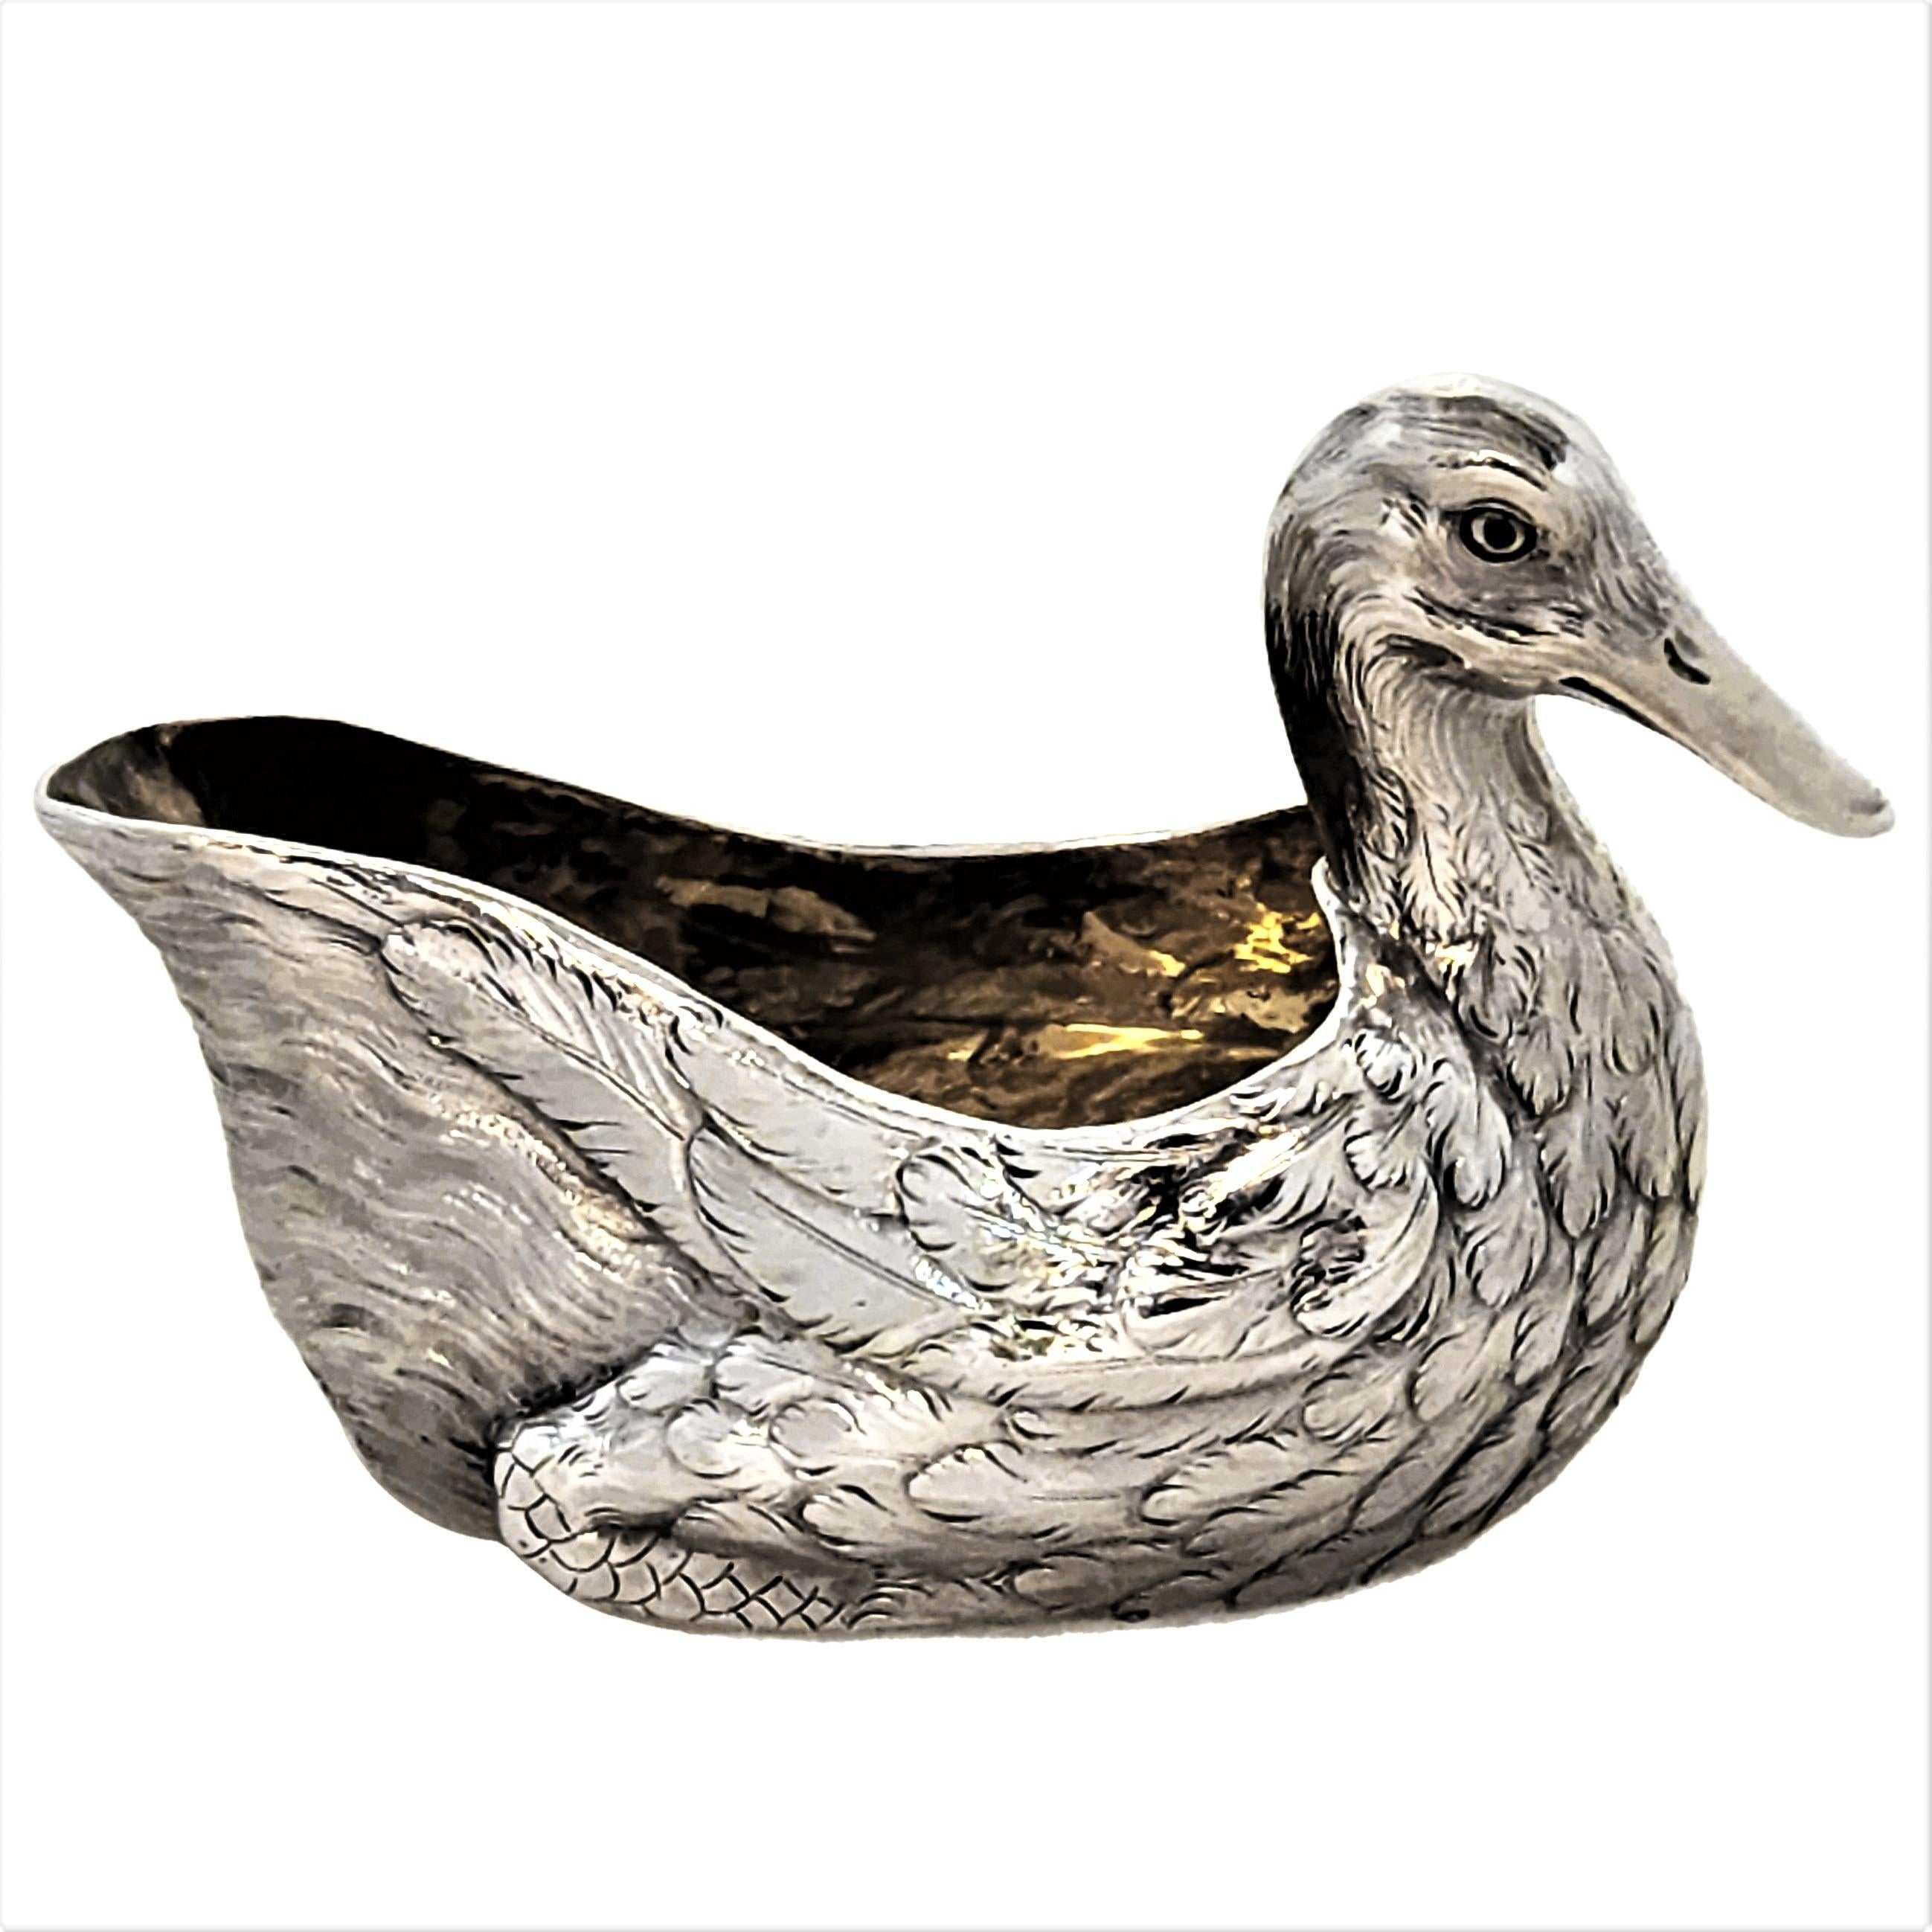 A pair of wonderful Antique Victorian Silver Cream Boats in the shape of Ducks. Each Duck Milk Jug is modelled with a charming attention to detail. The Salts are gilded on the inside and have inset glass eyes. Each Cream Boat has the word QUACK